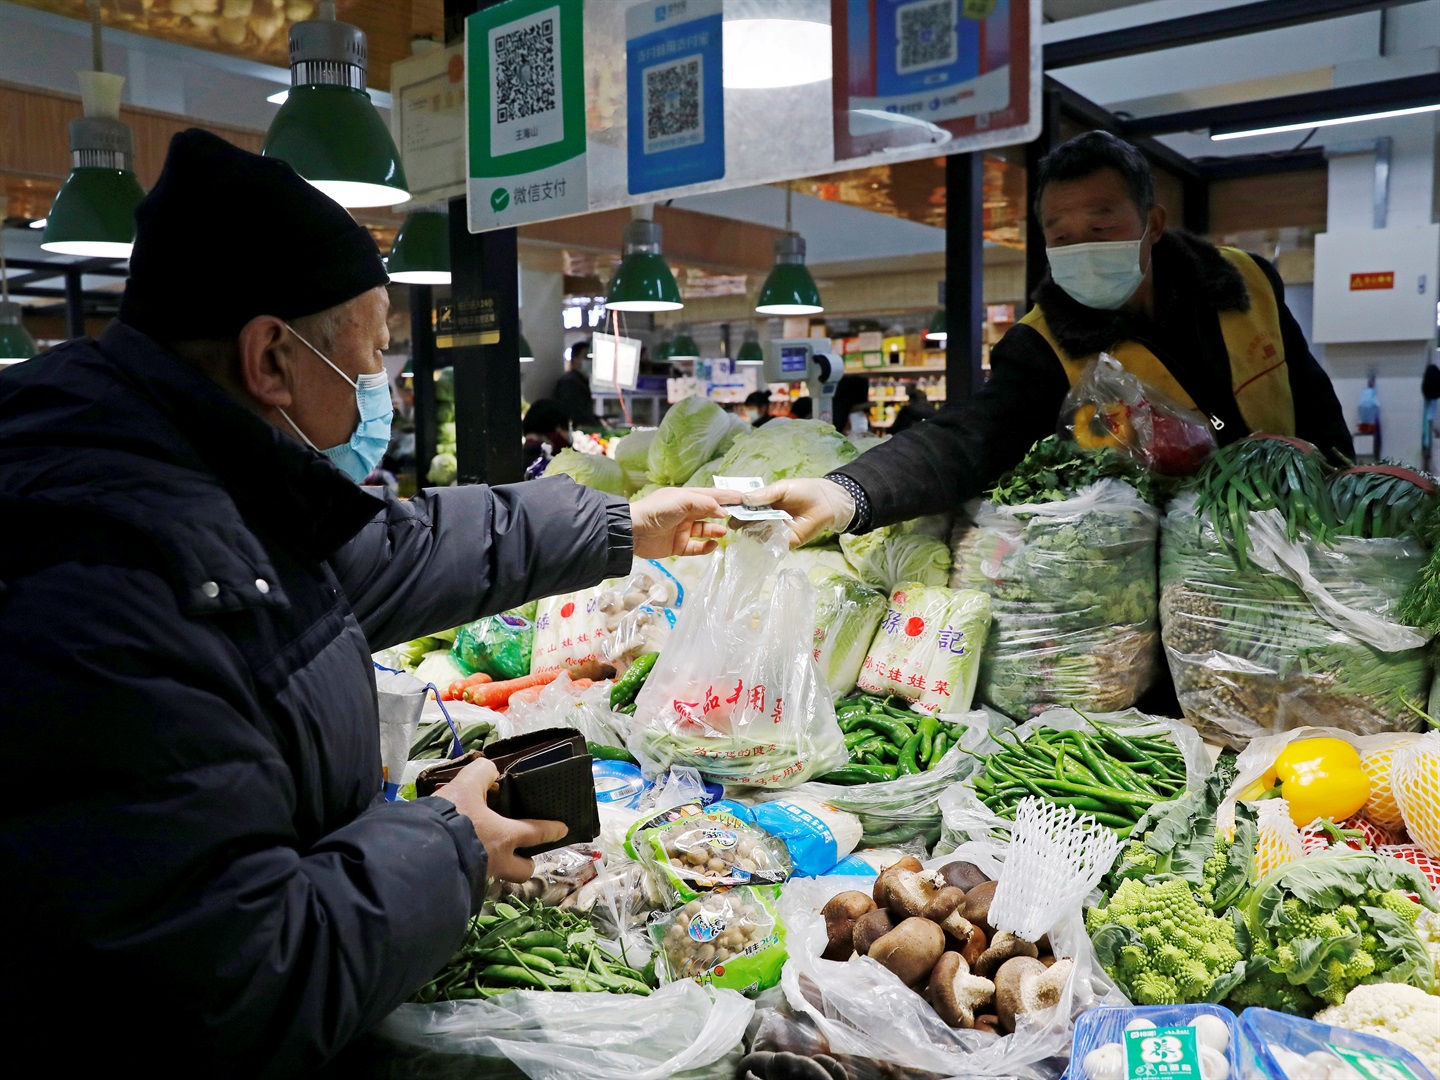 Businessinsider.co.za | Beijing plans to hand out R109 a month to low-income families to help offset the cost of food